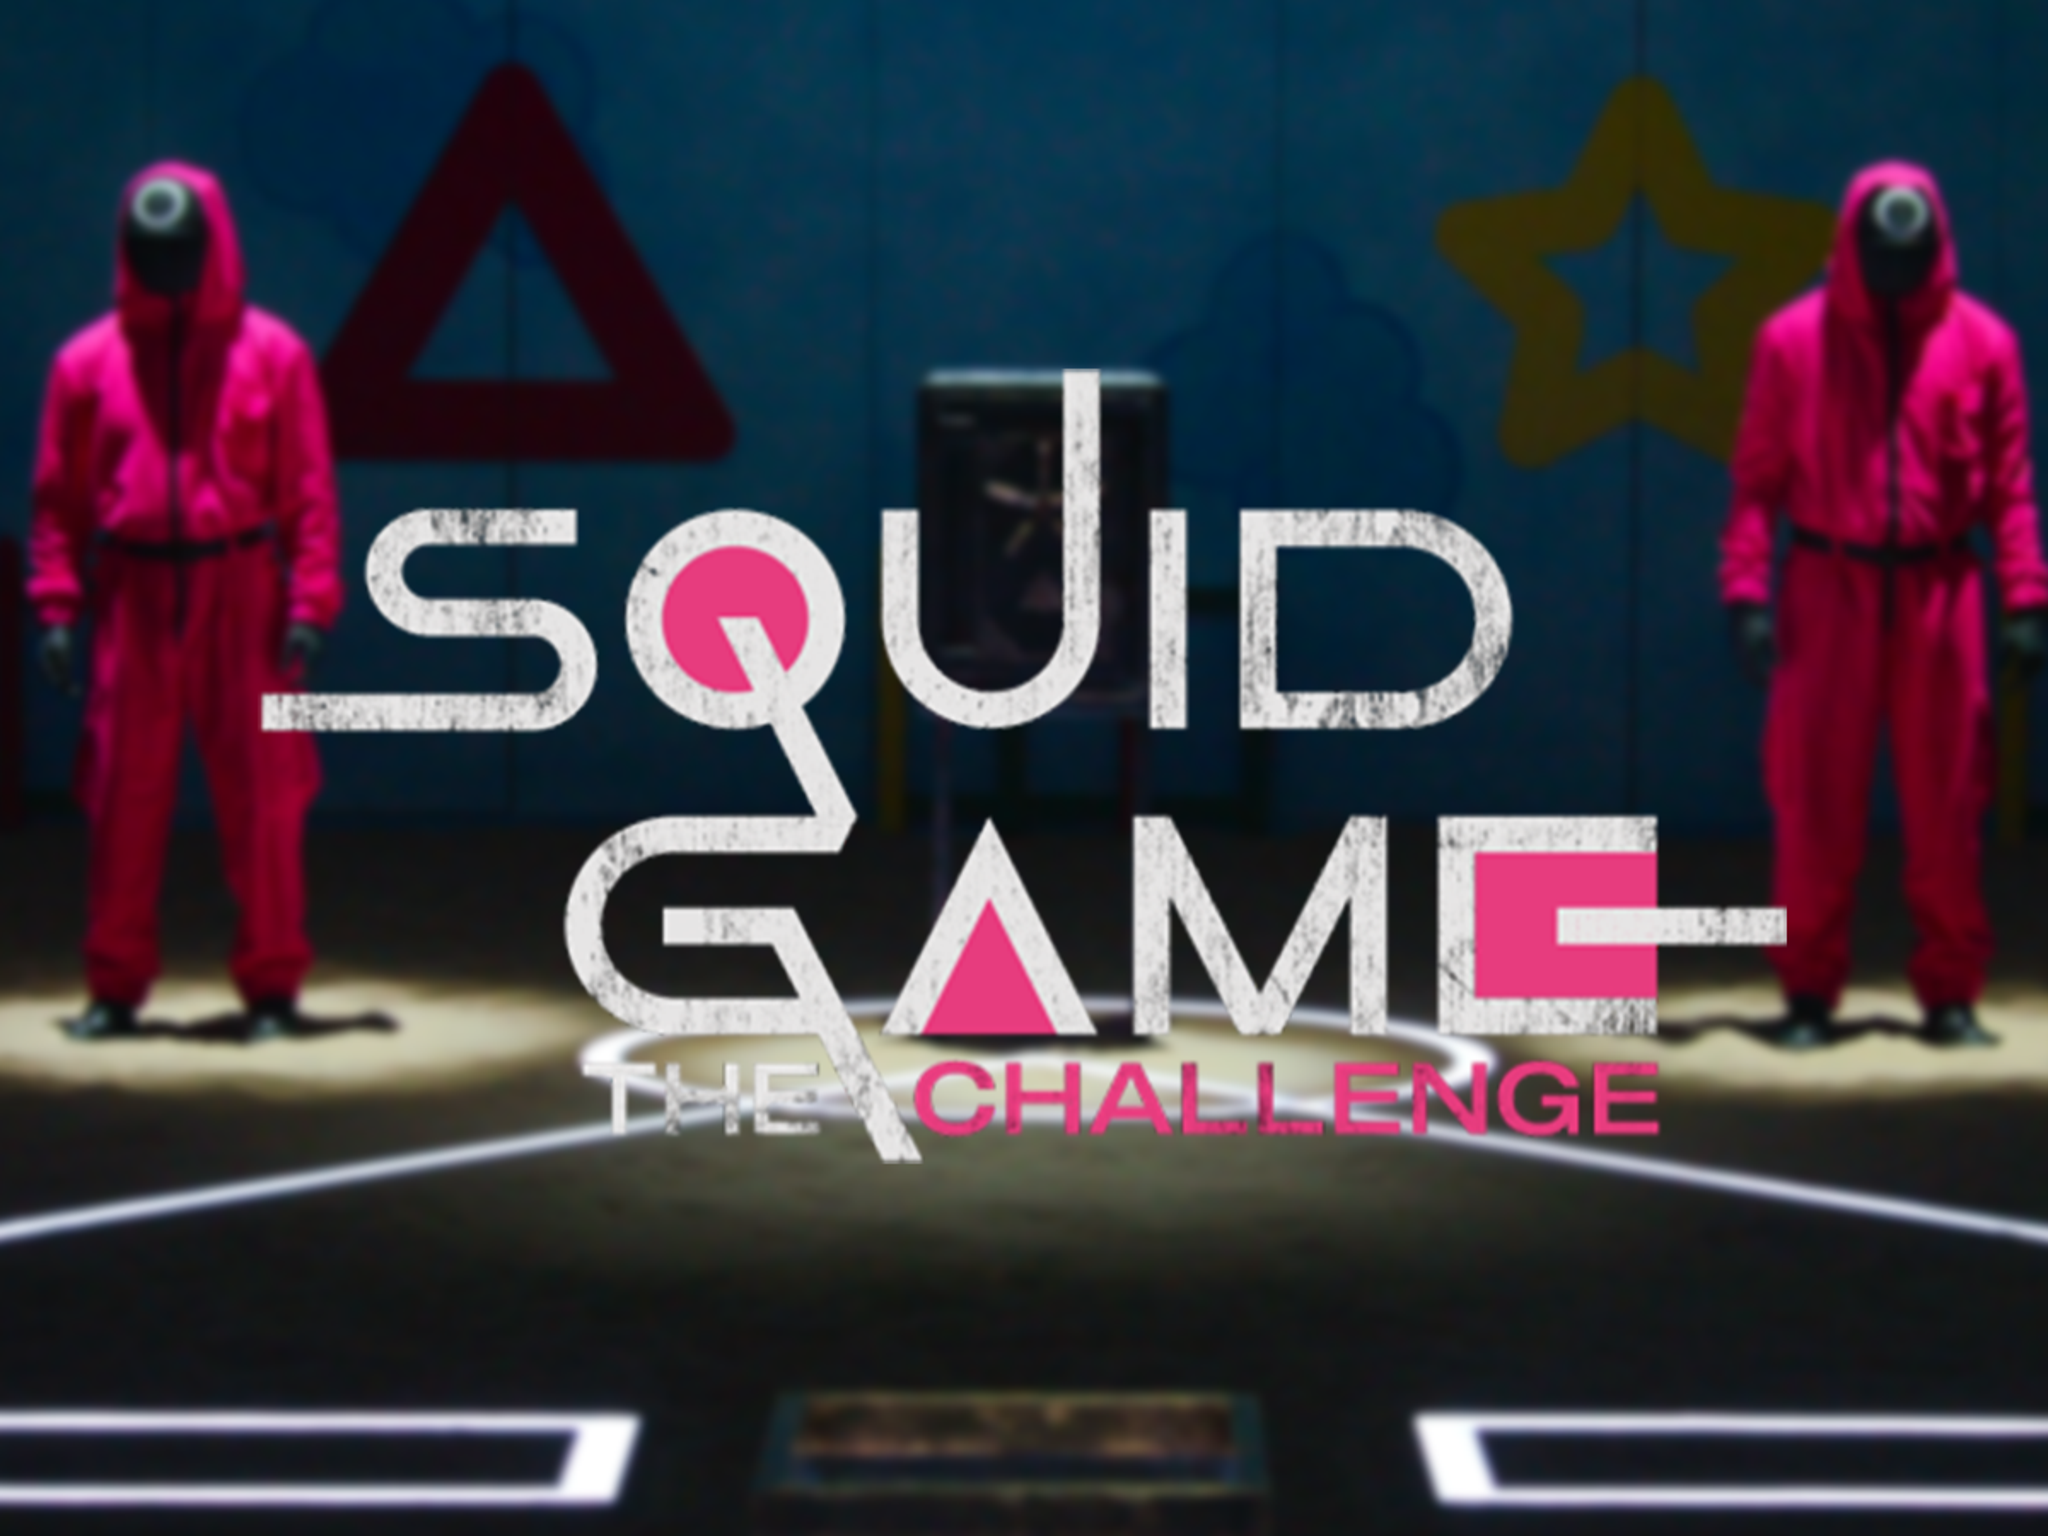 The Winner of Squid Game The Challenge says they havent gotten paid #s, squid  game